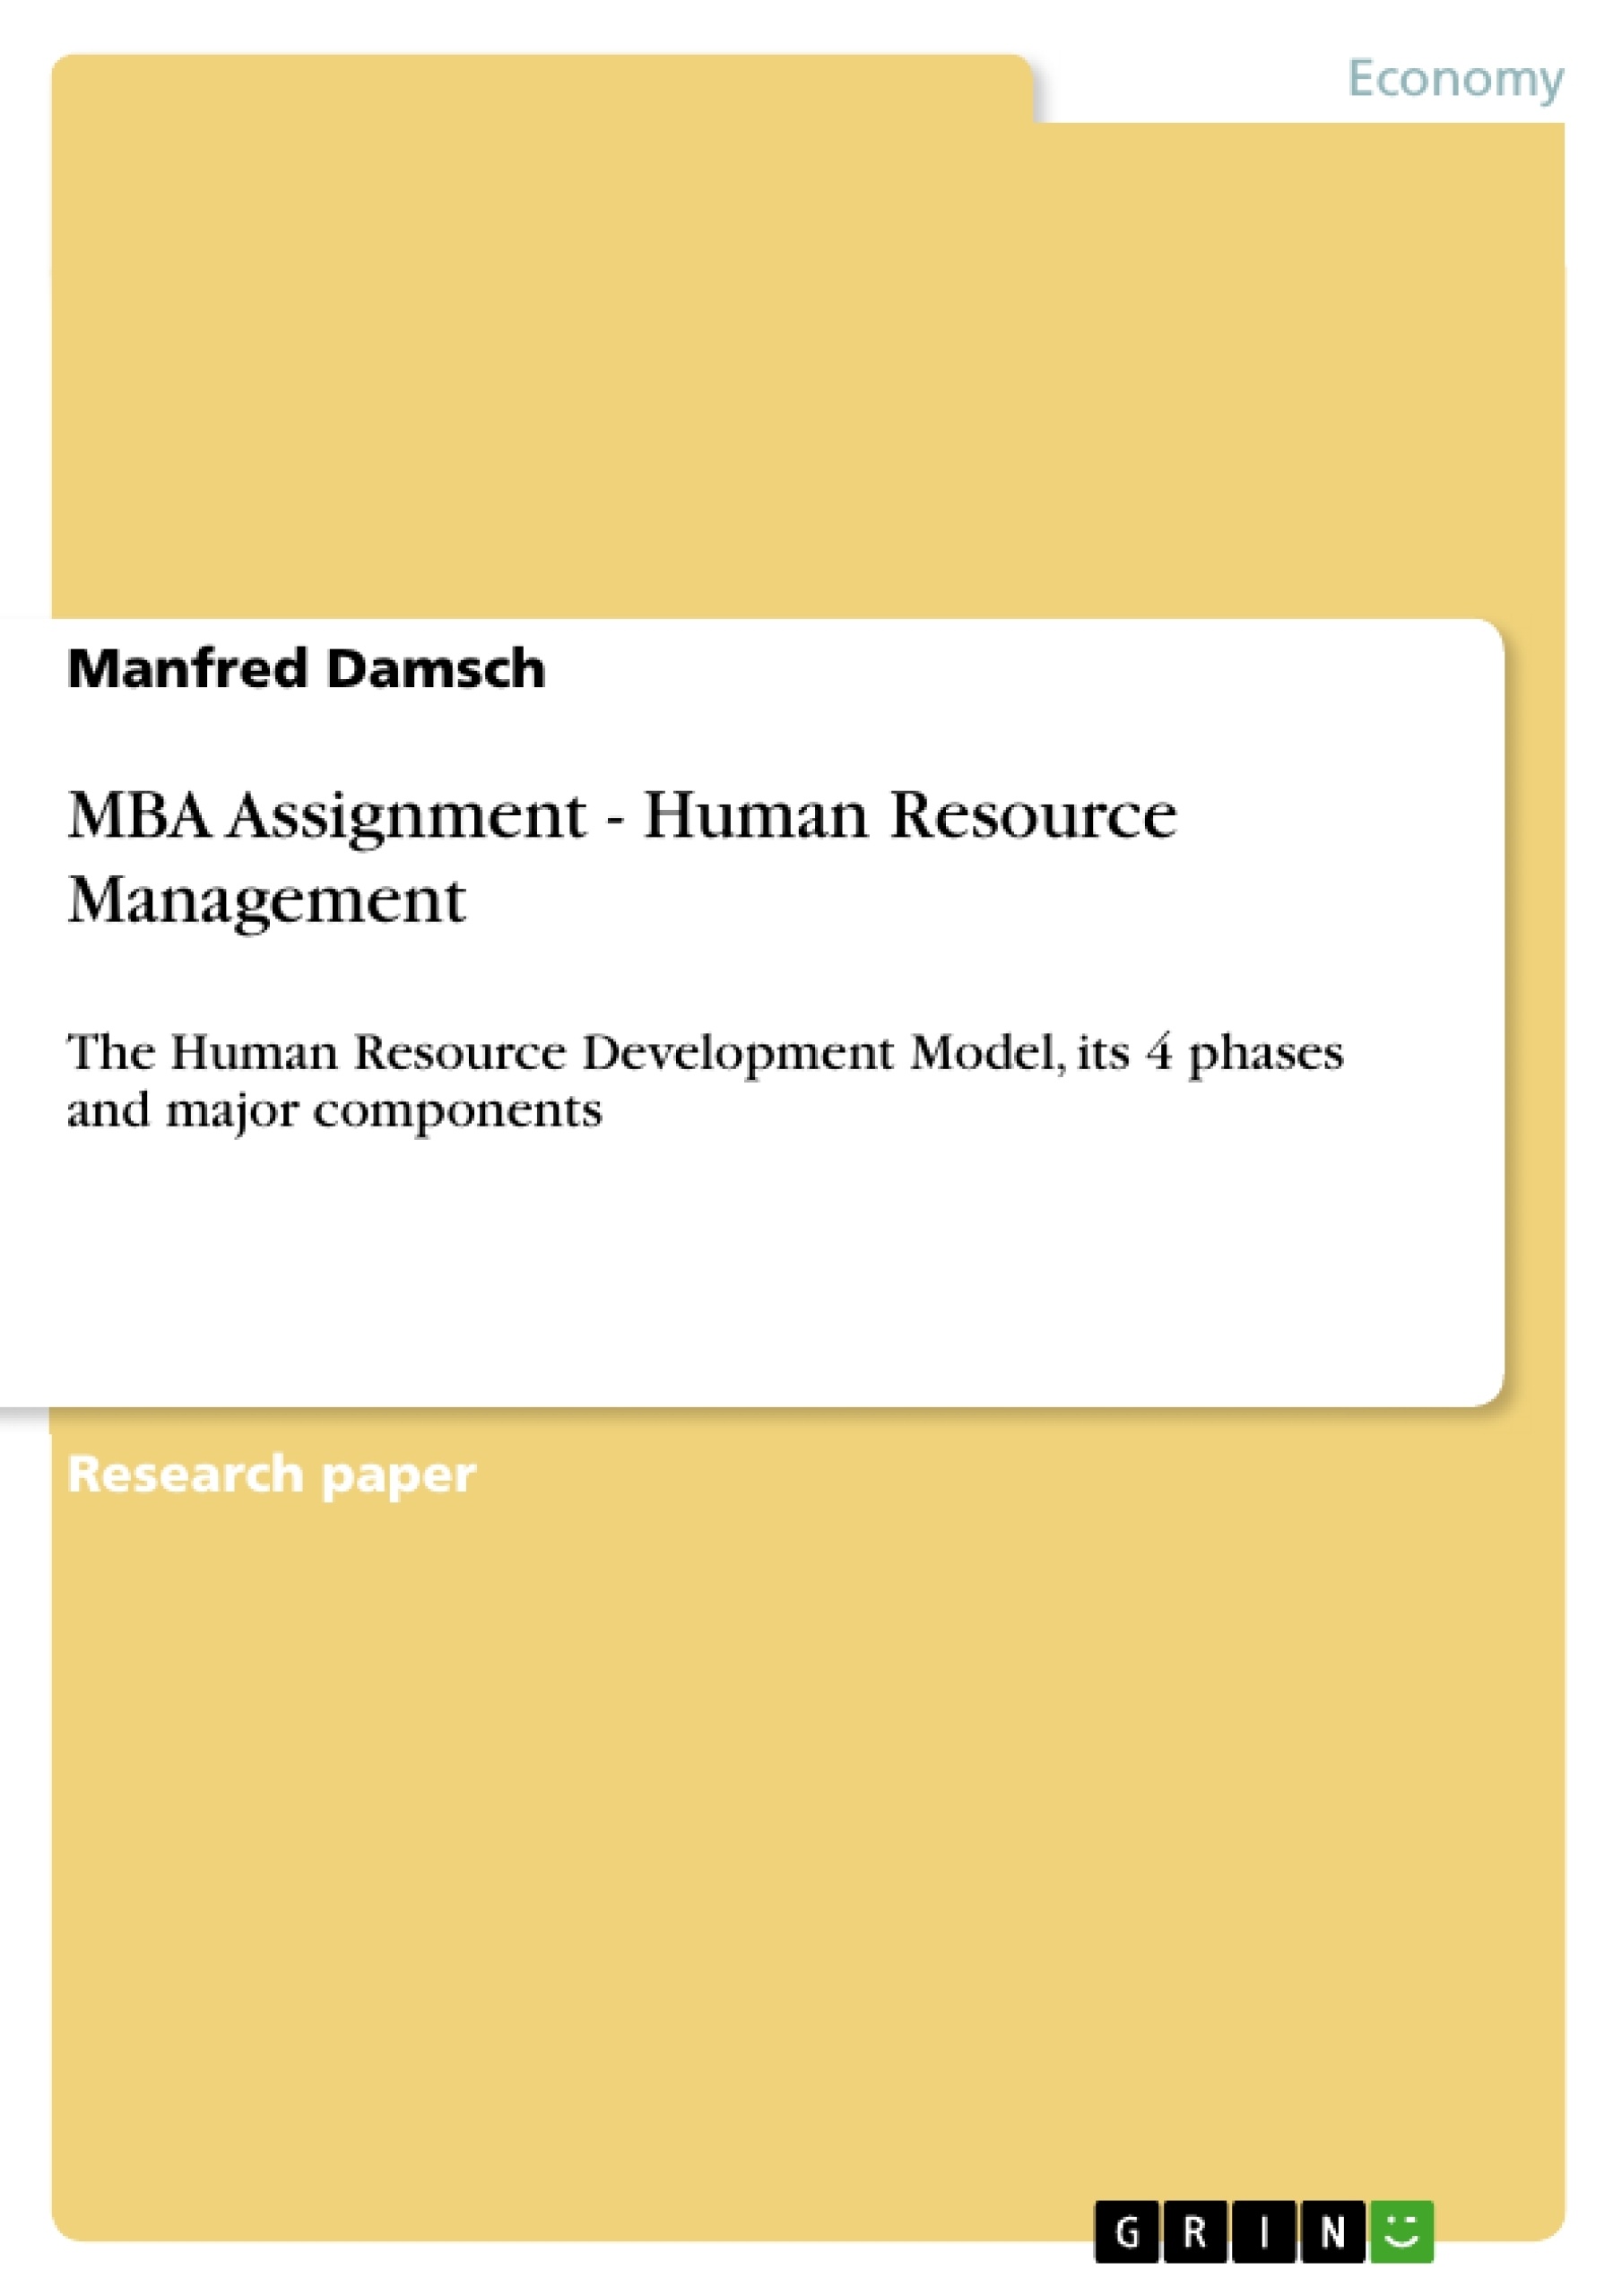 research paper related to human resource management